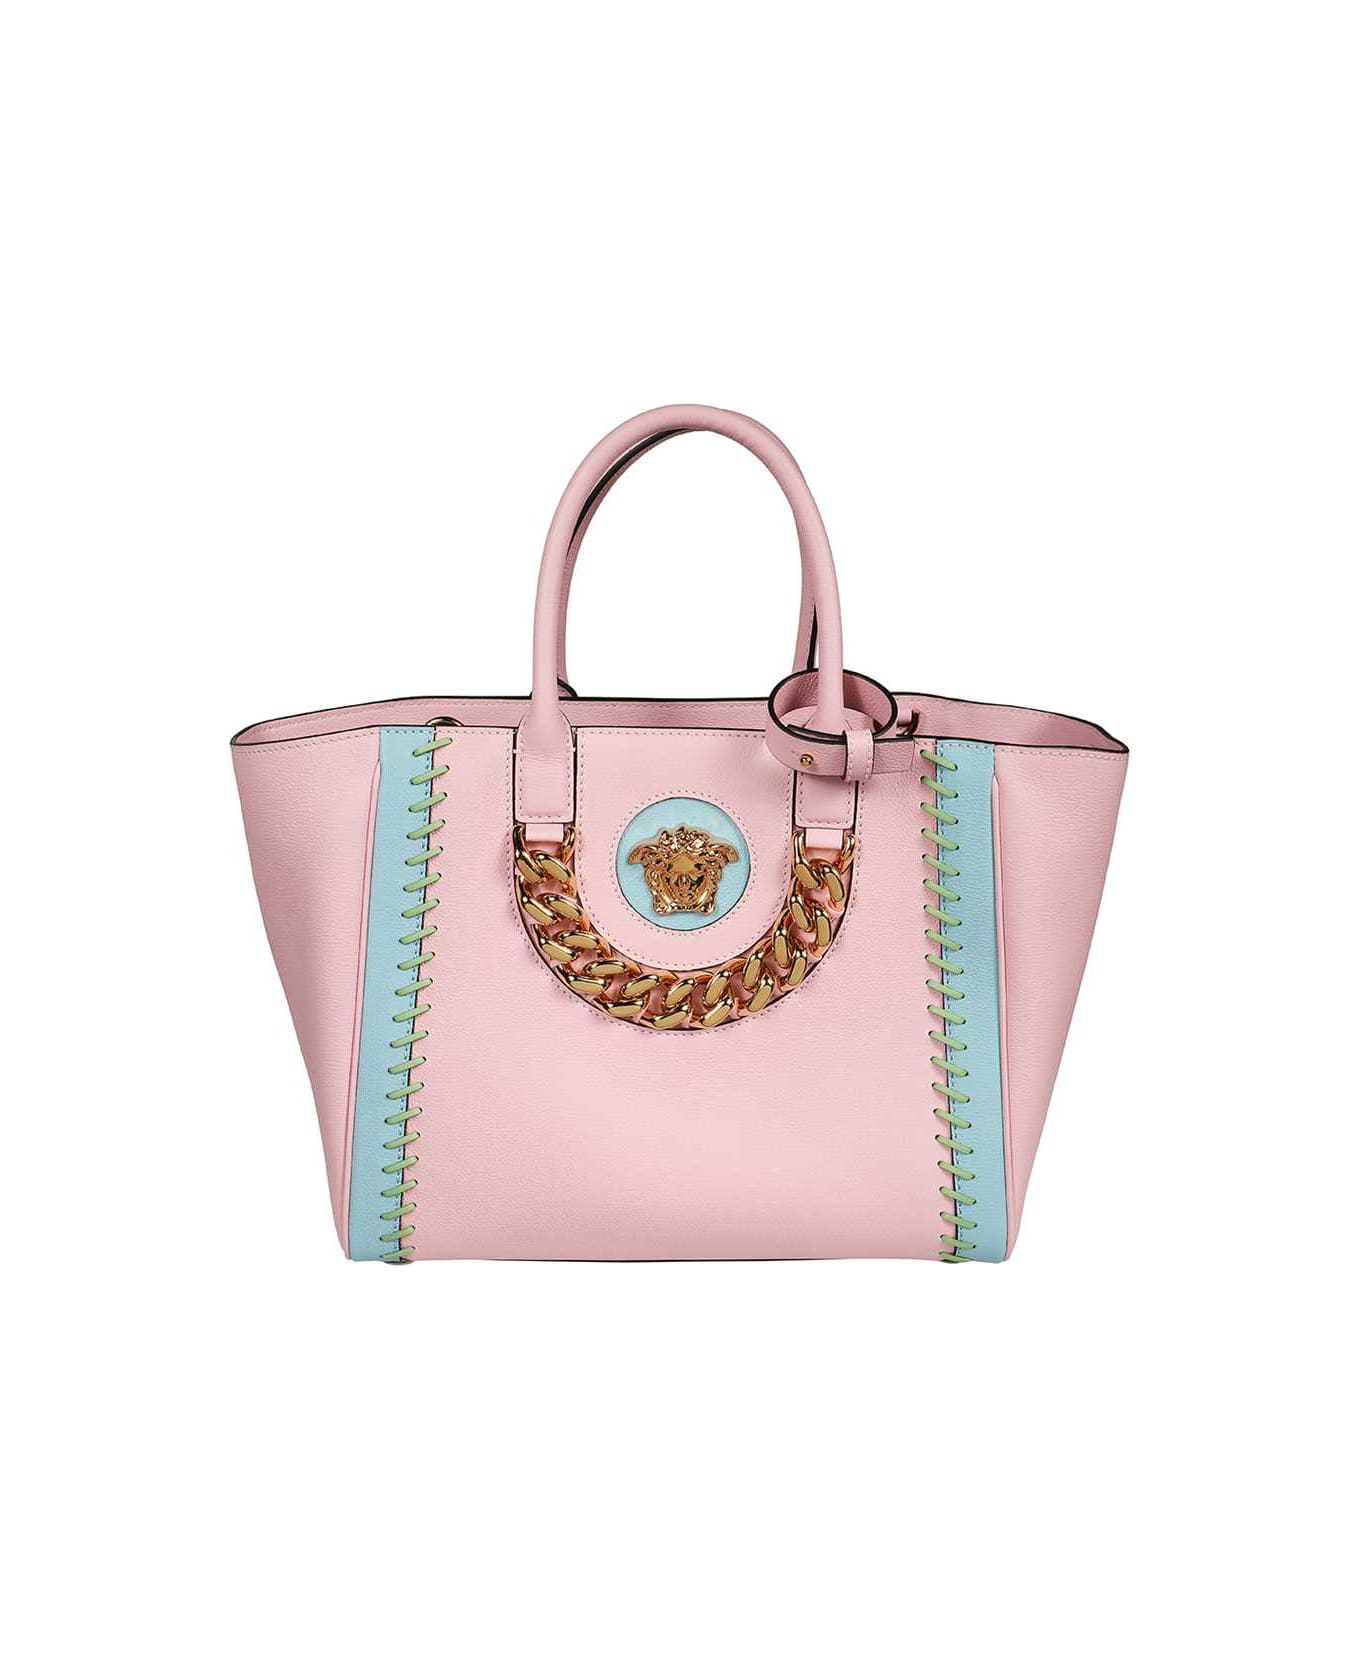 Versace Leather Tote - Pink トートバッグ